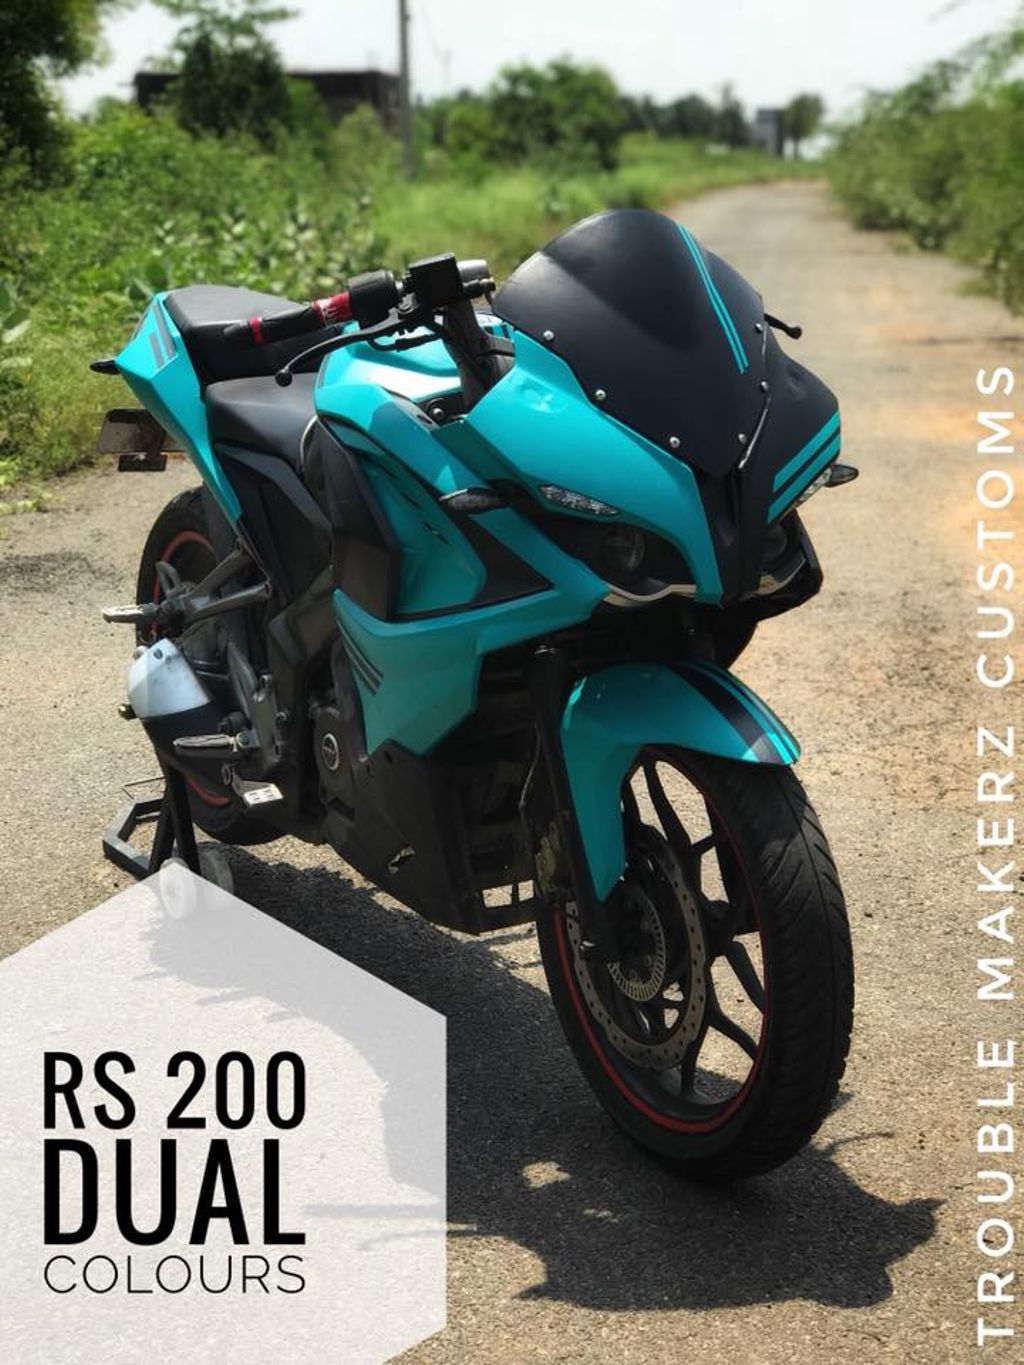 Customised Bajaj Pulsar RS 200 By Trouble Makerz Looks Meaner